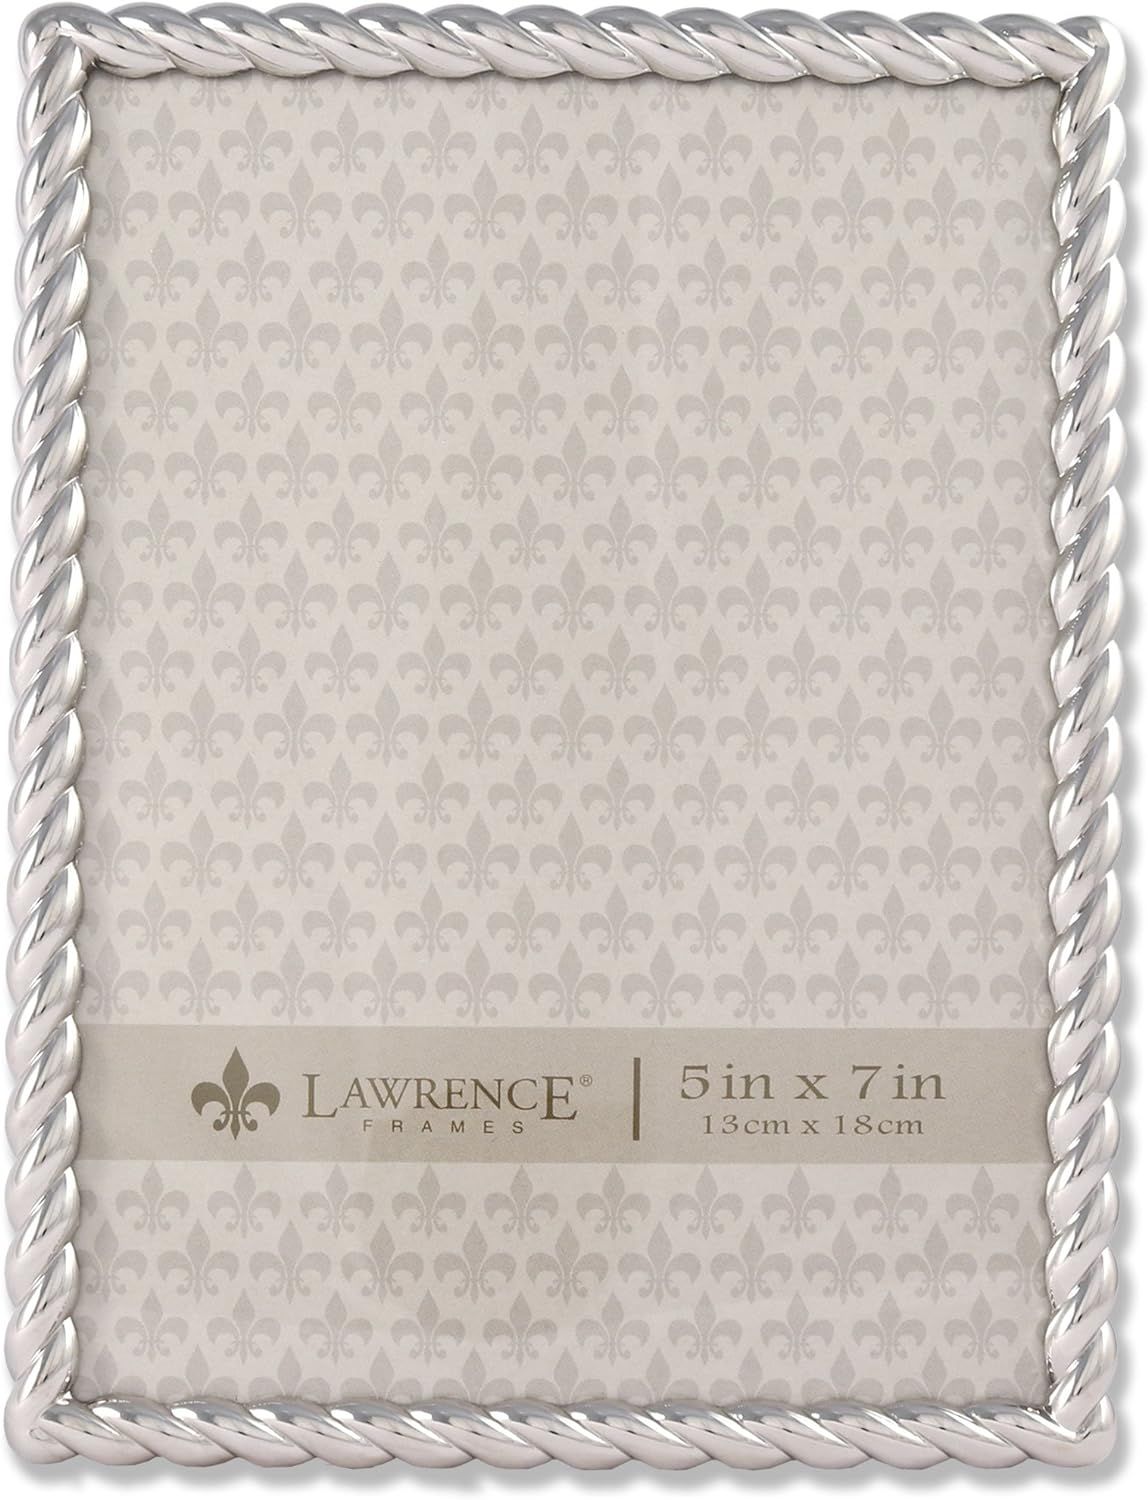 Lawrence Frames Rope Design Metal Frame, 5 x 7, Silver | Amazon (US)